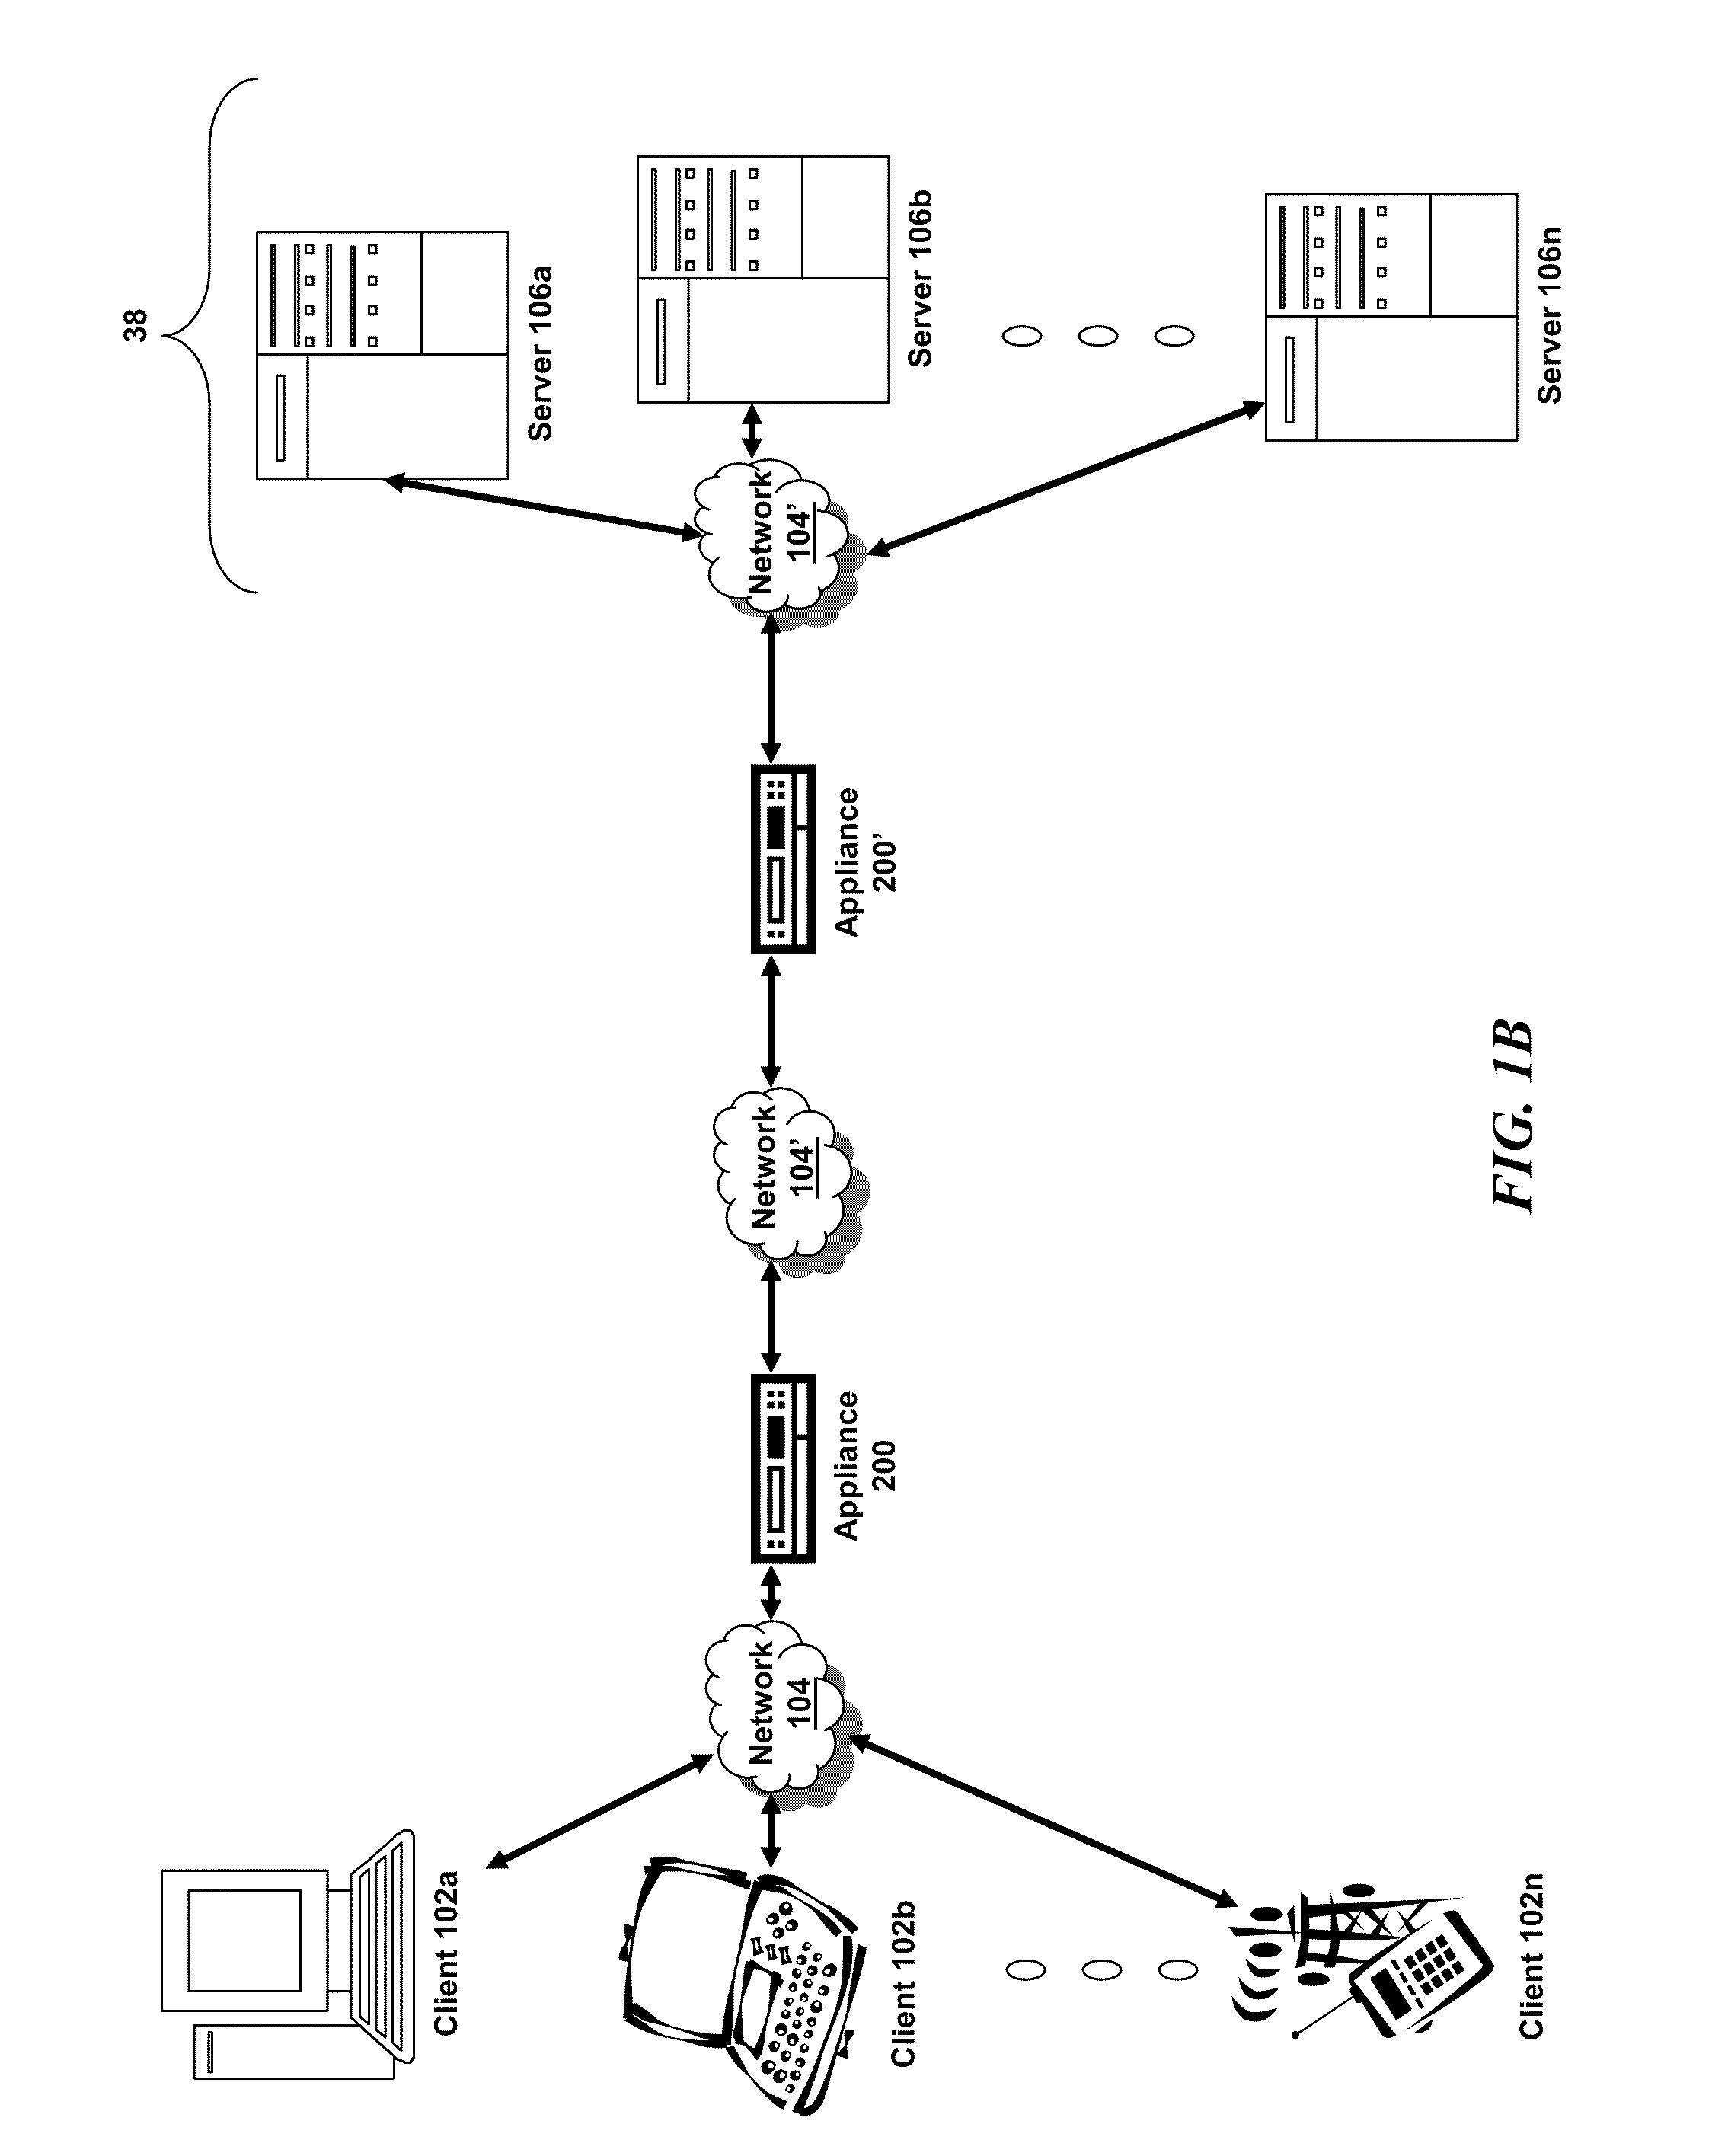 Systems and methods for management of common application firewall session data in a multiple core system